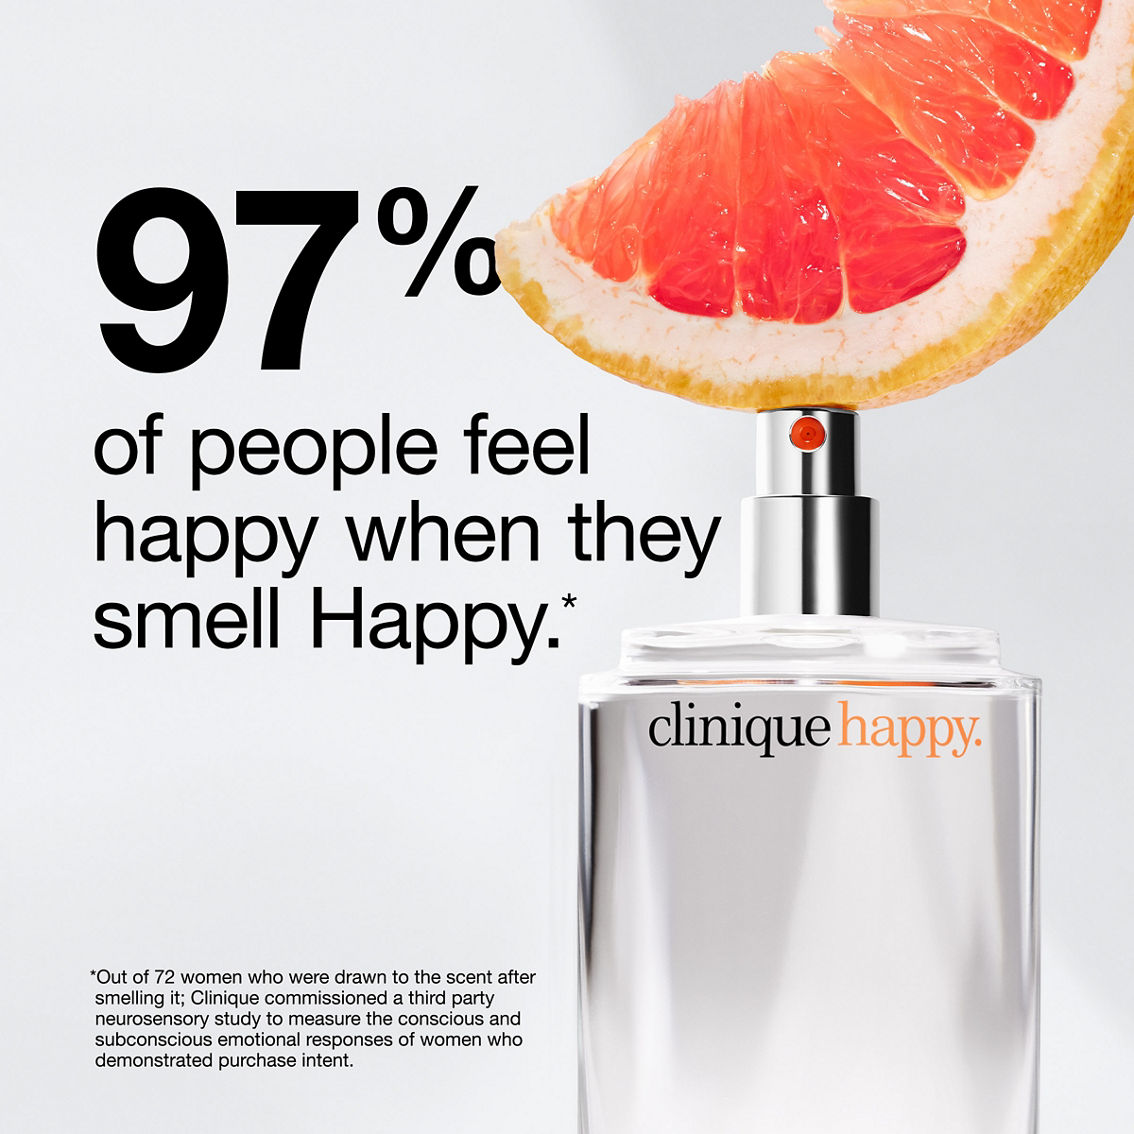 Clinique Perfectly Happy Fragrance 3 pc. Set - Image 4 of 4